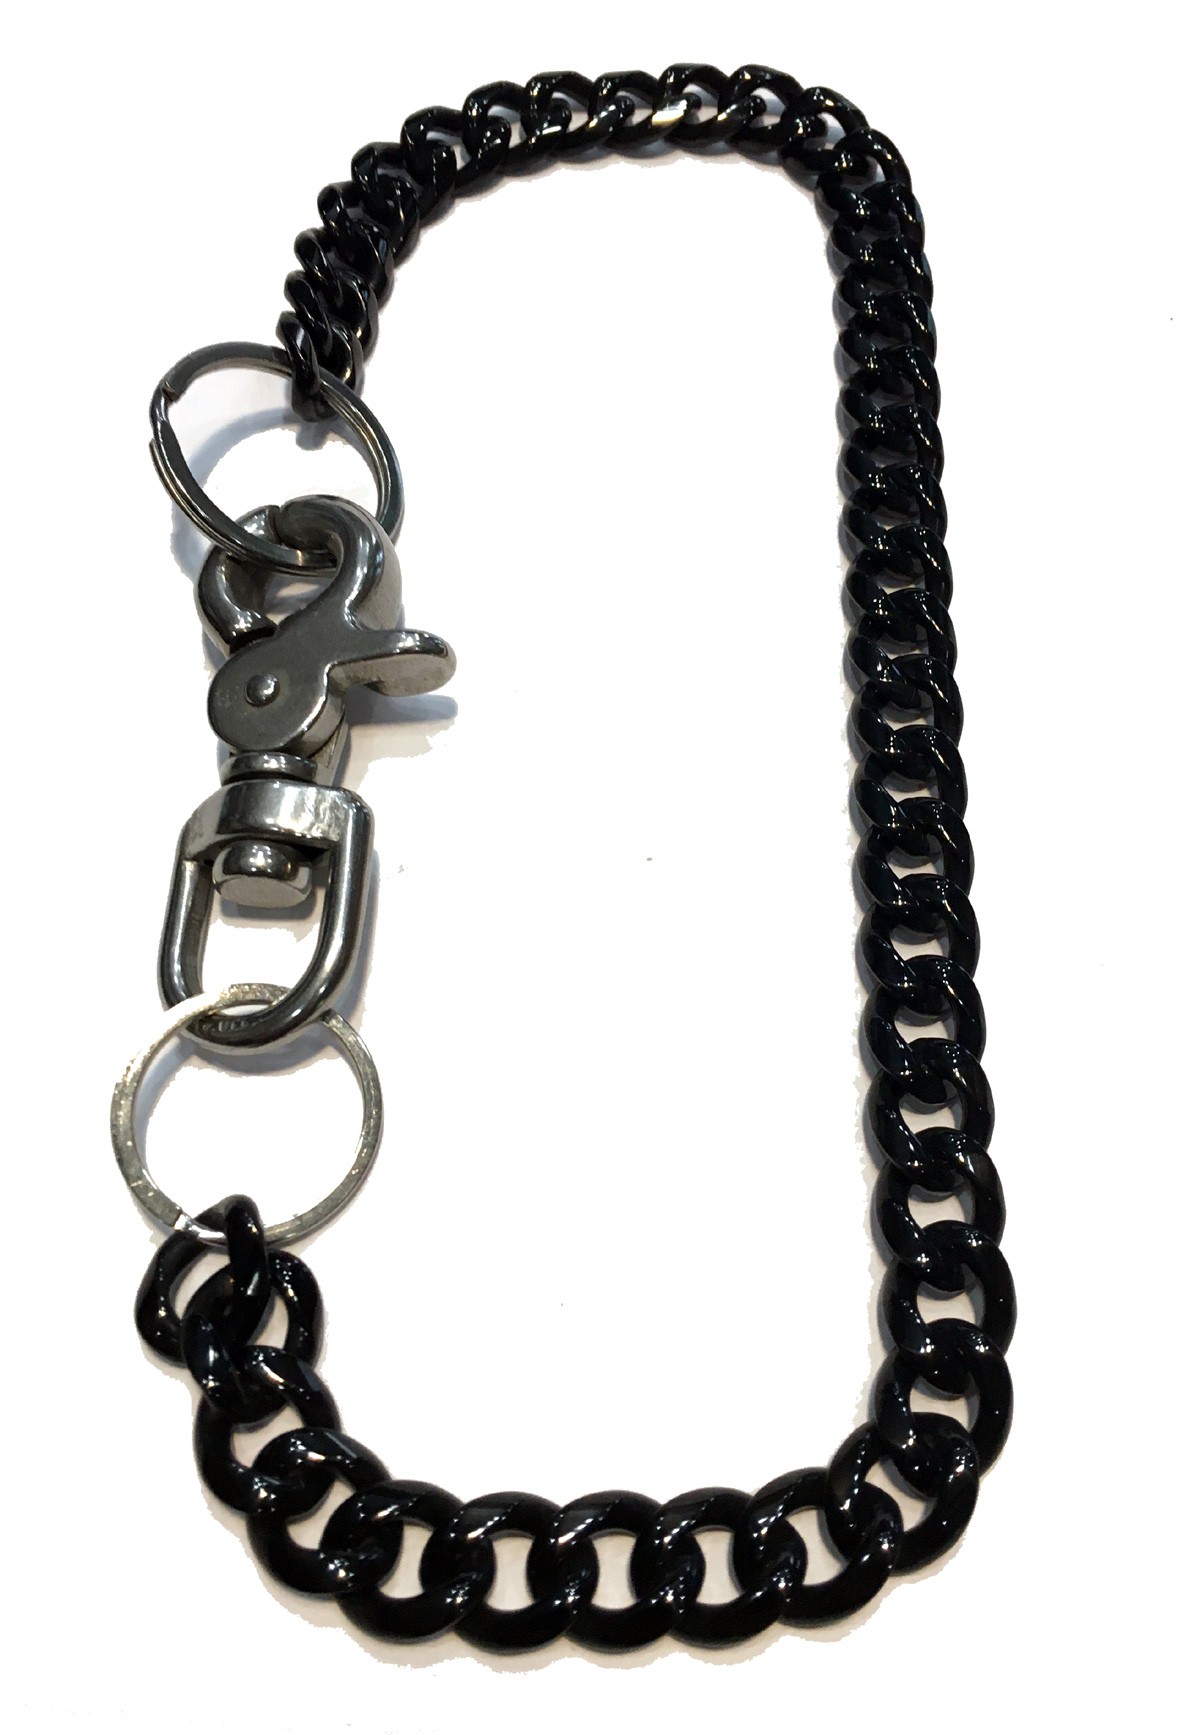 WALLET CHAIN CURB BLACK 12MM STAINLESS STEEL 18